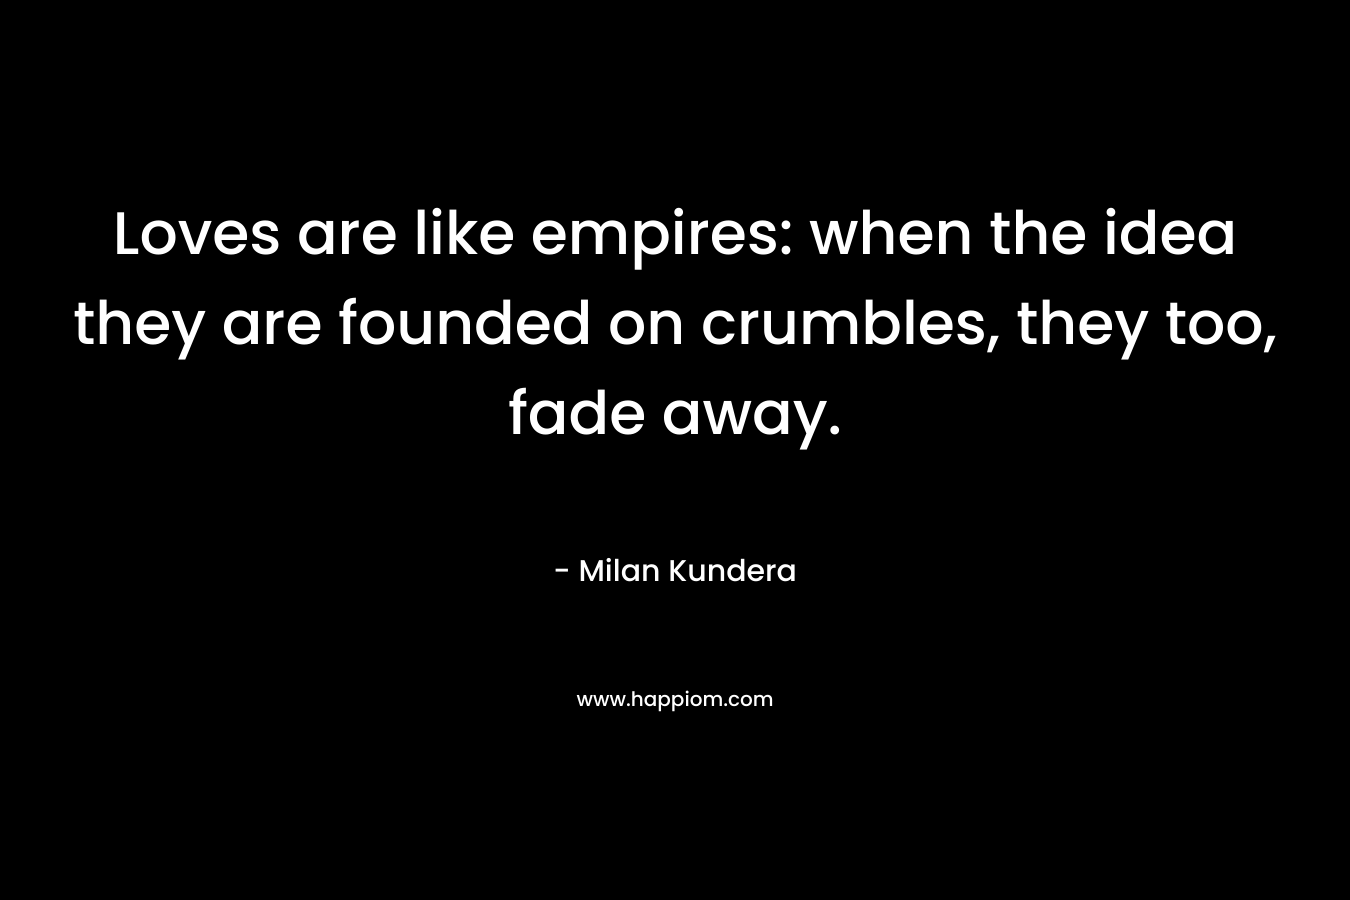 Loves are like empires: when the idea they are founded on crumbles, they too, fade away.